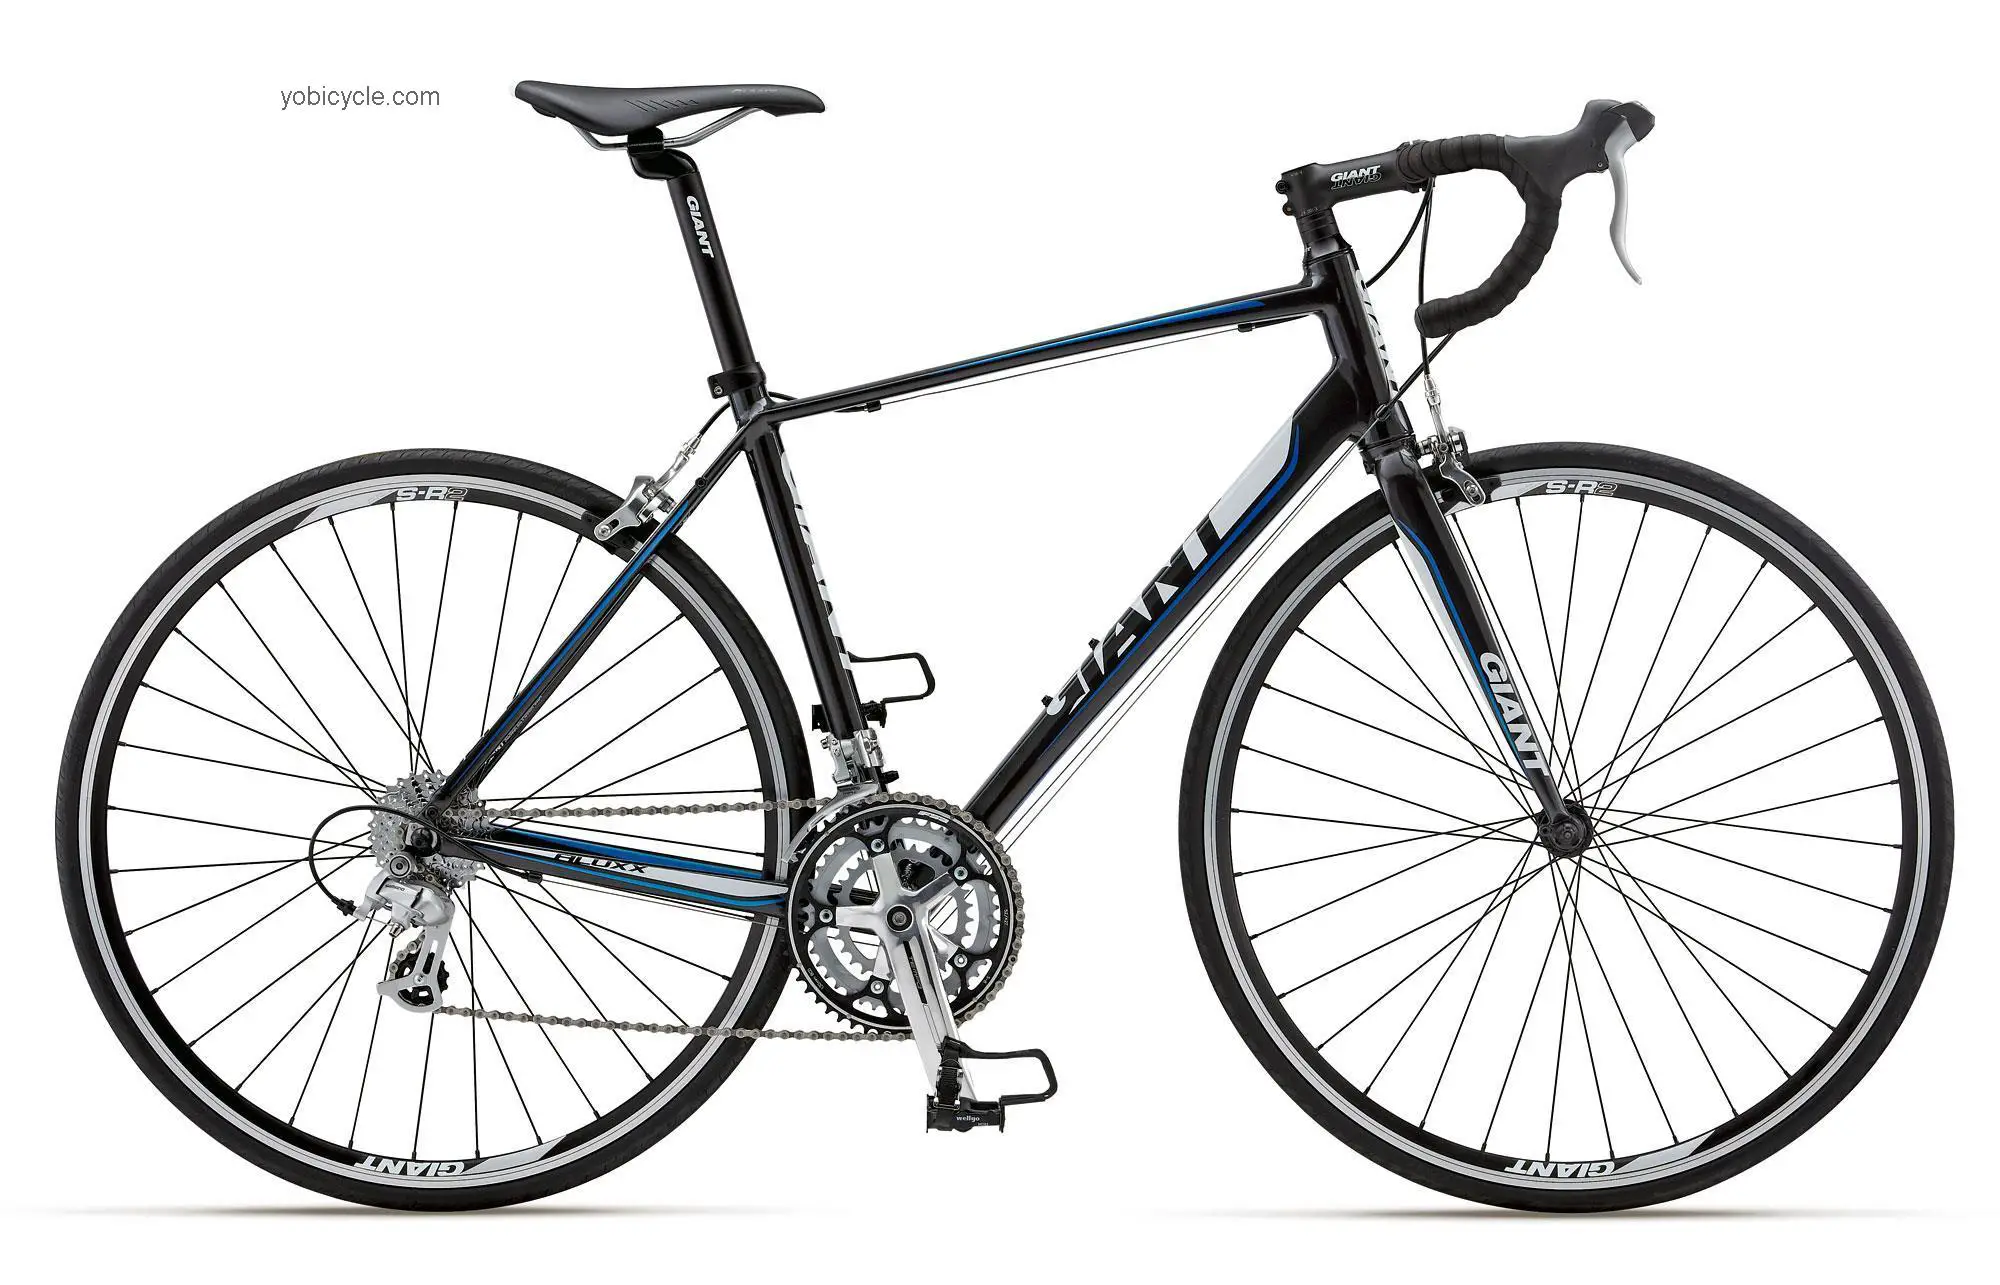 Giant Defy 5 Triple competitors and comparison tool online specs and performance